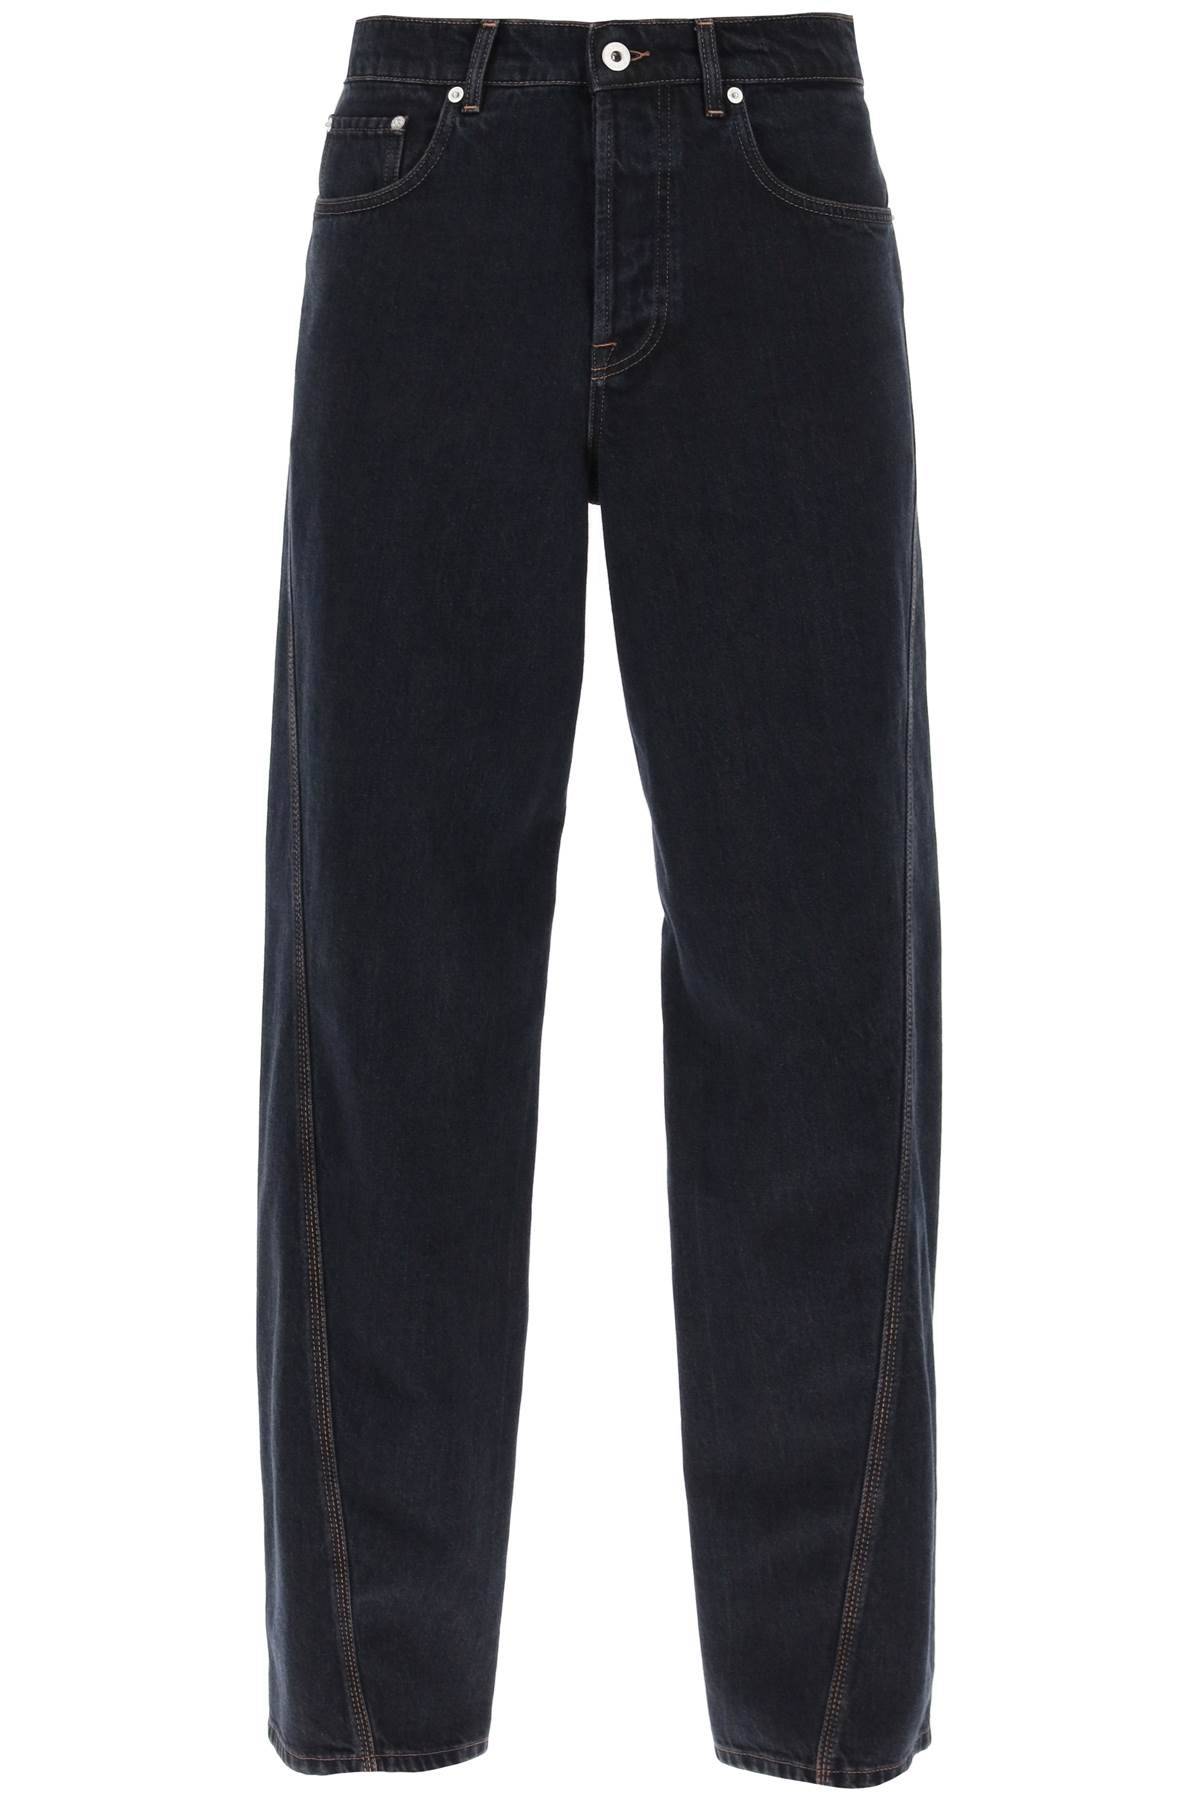 Lanvin LANVIN baggy jeans with twisted seams